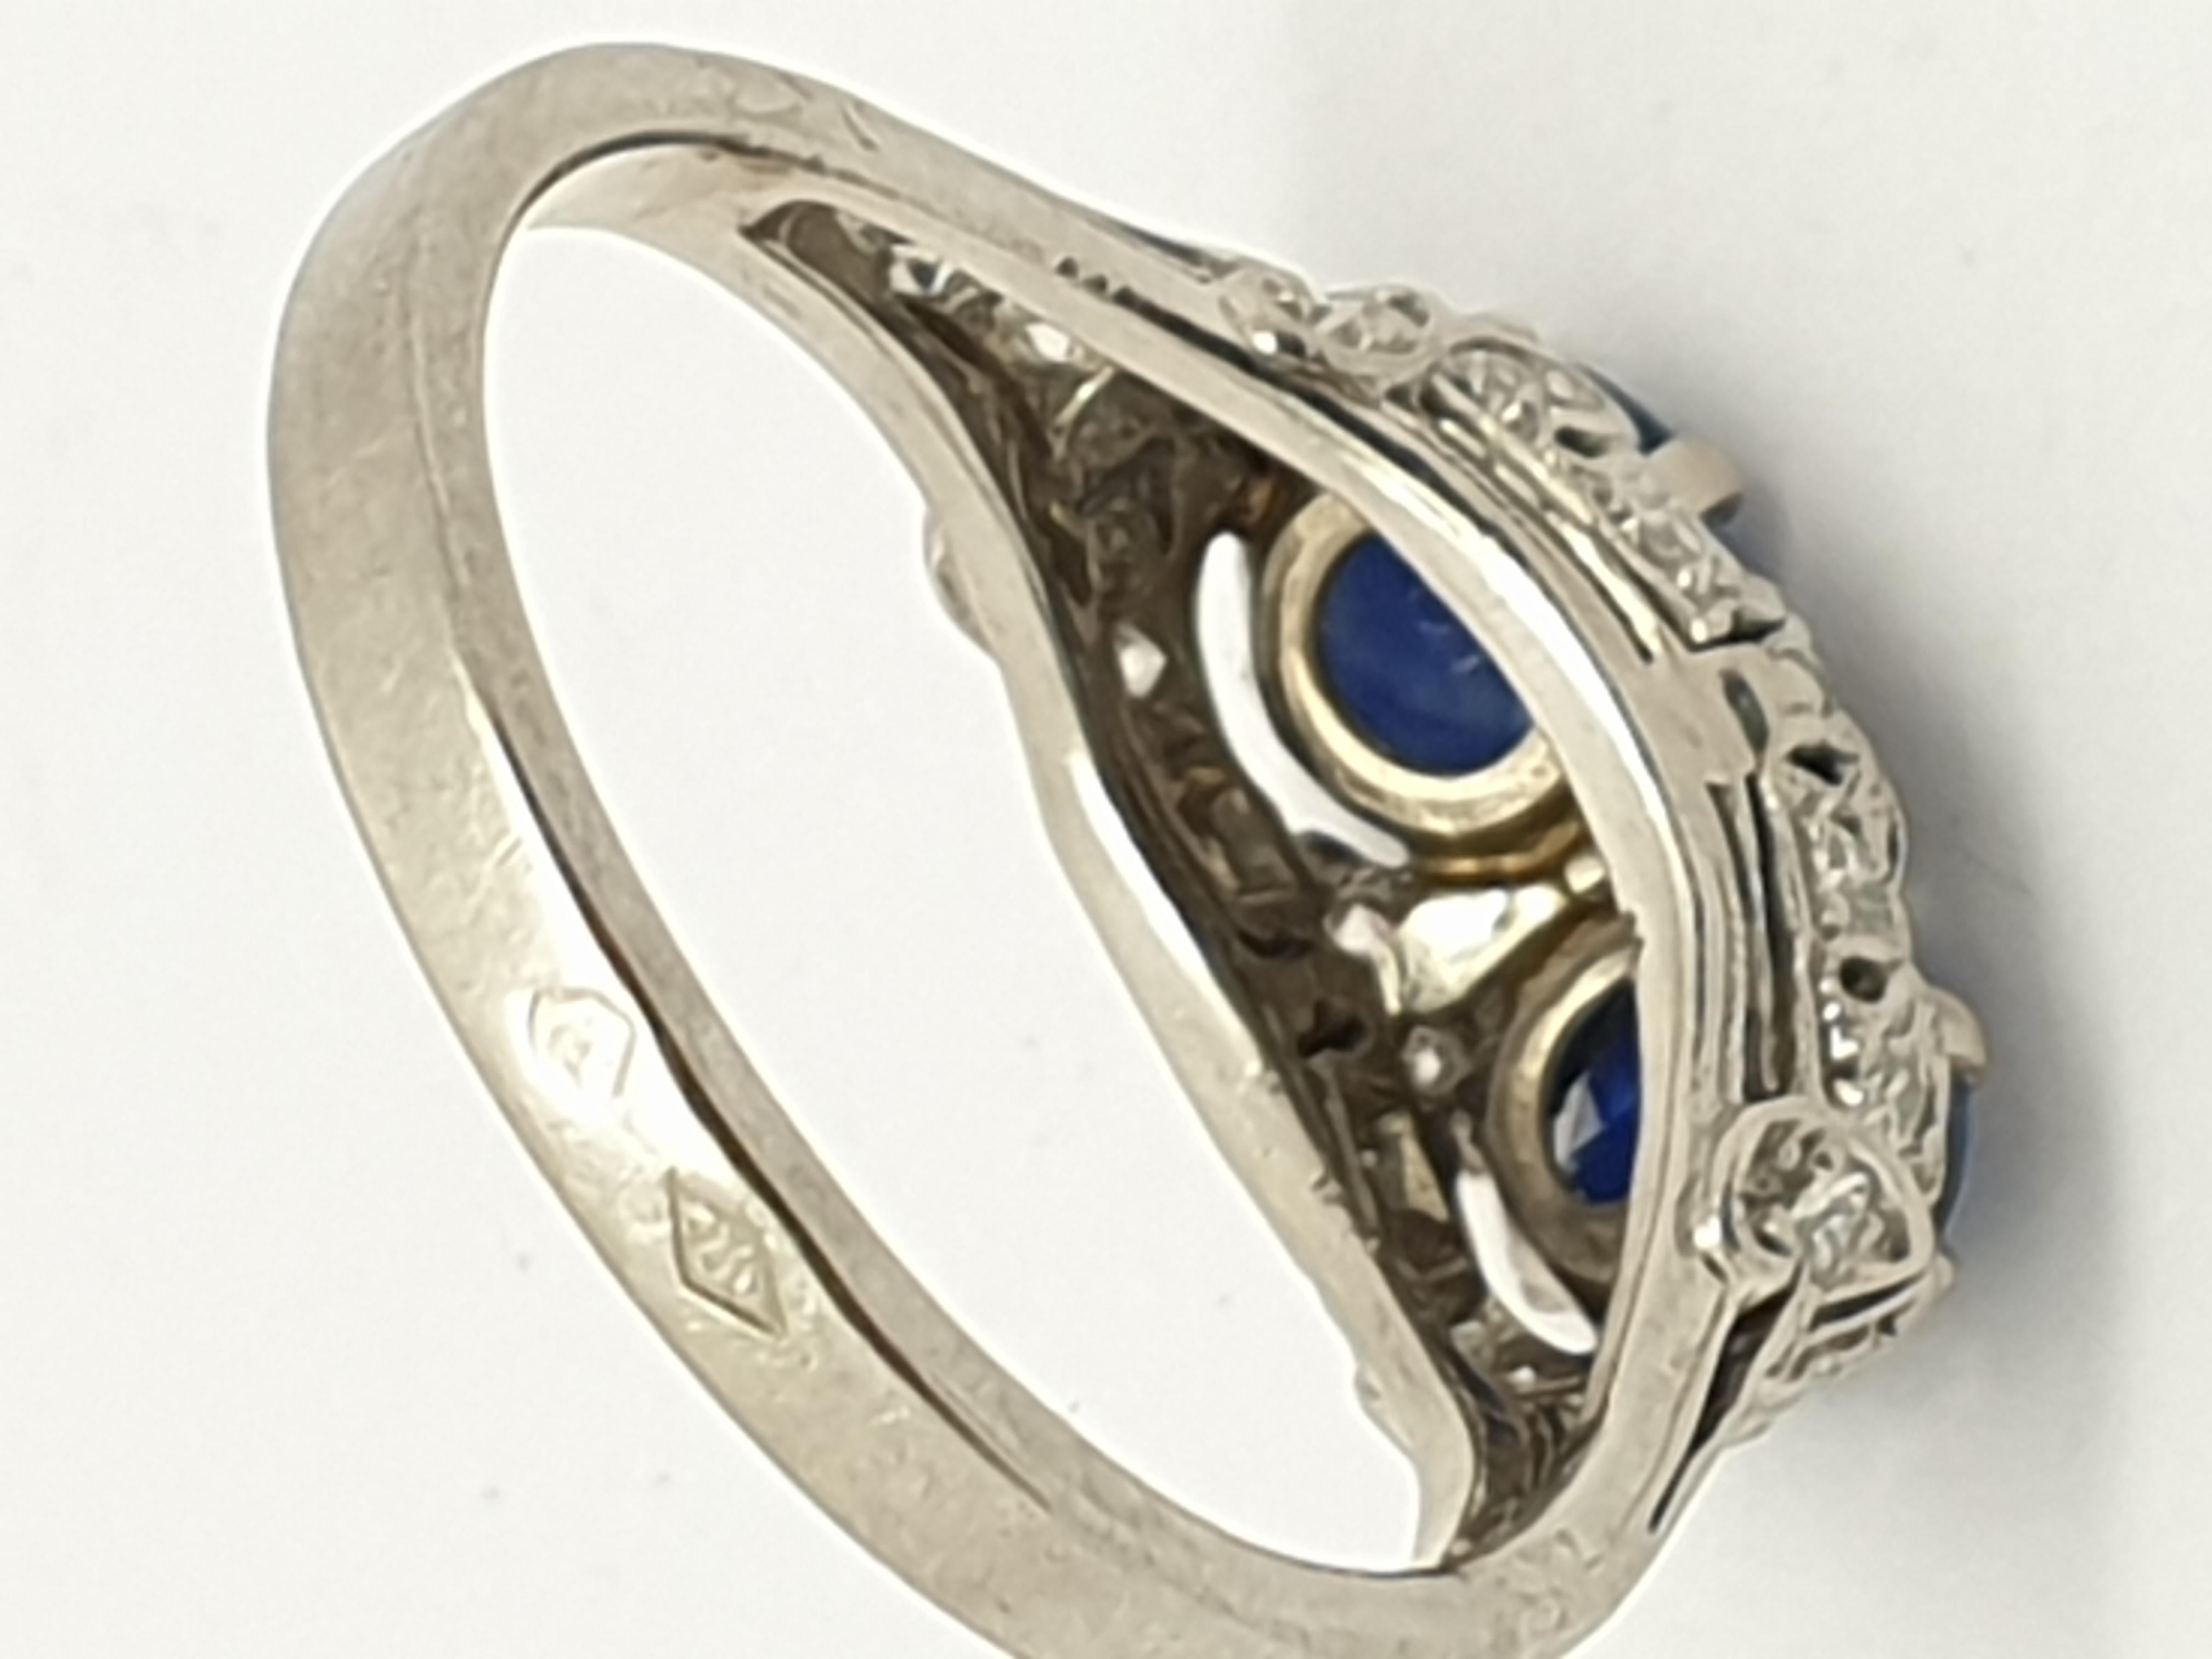 Art Deco  sapphire diamond ring featuring two gorgeous 0.50ct each genuine natural blue round  Ceylon sapphires. The beautiful filigreed trellis that wraps around the sapphires and onto the shoulders of the band reveals the ring’s Art Deco